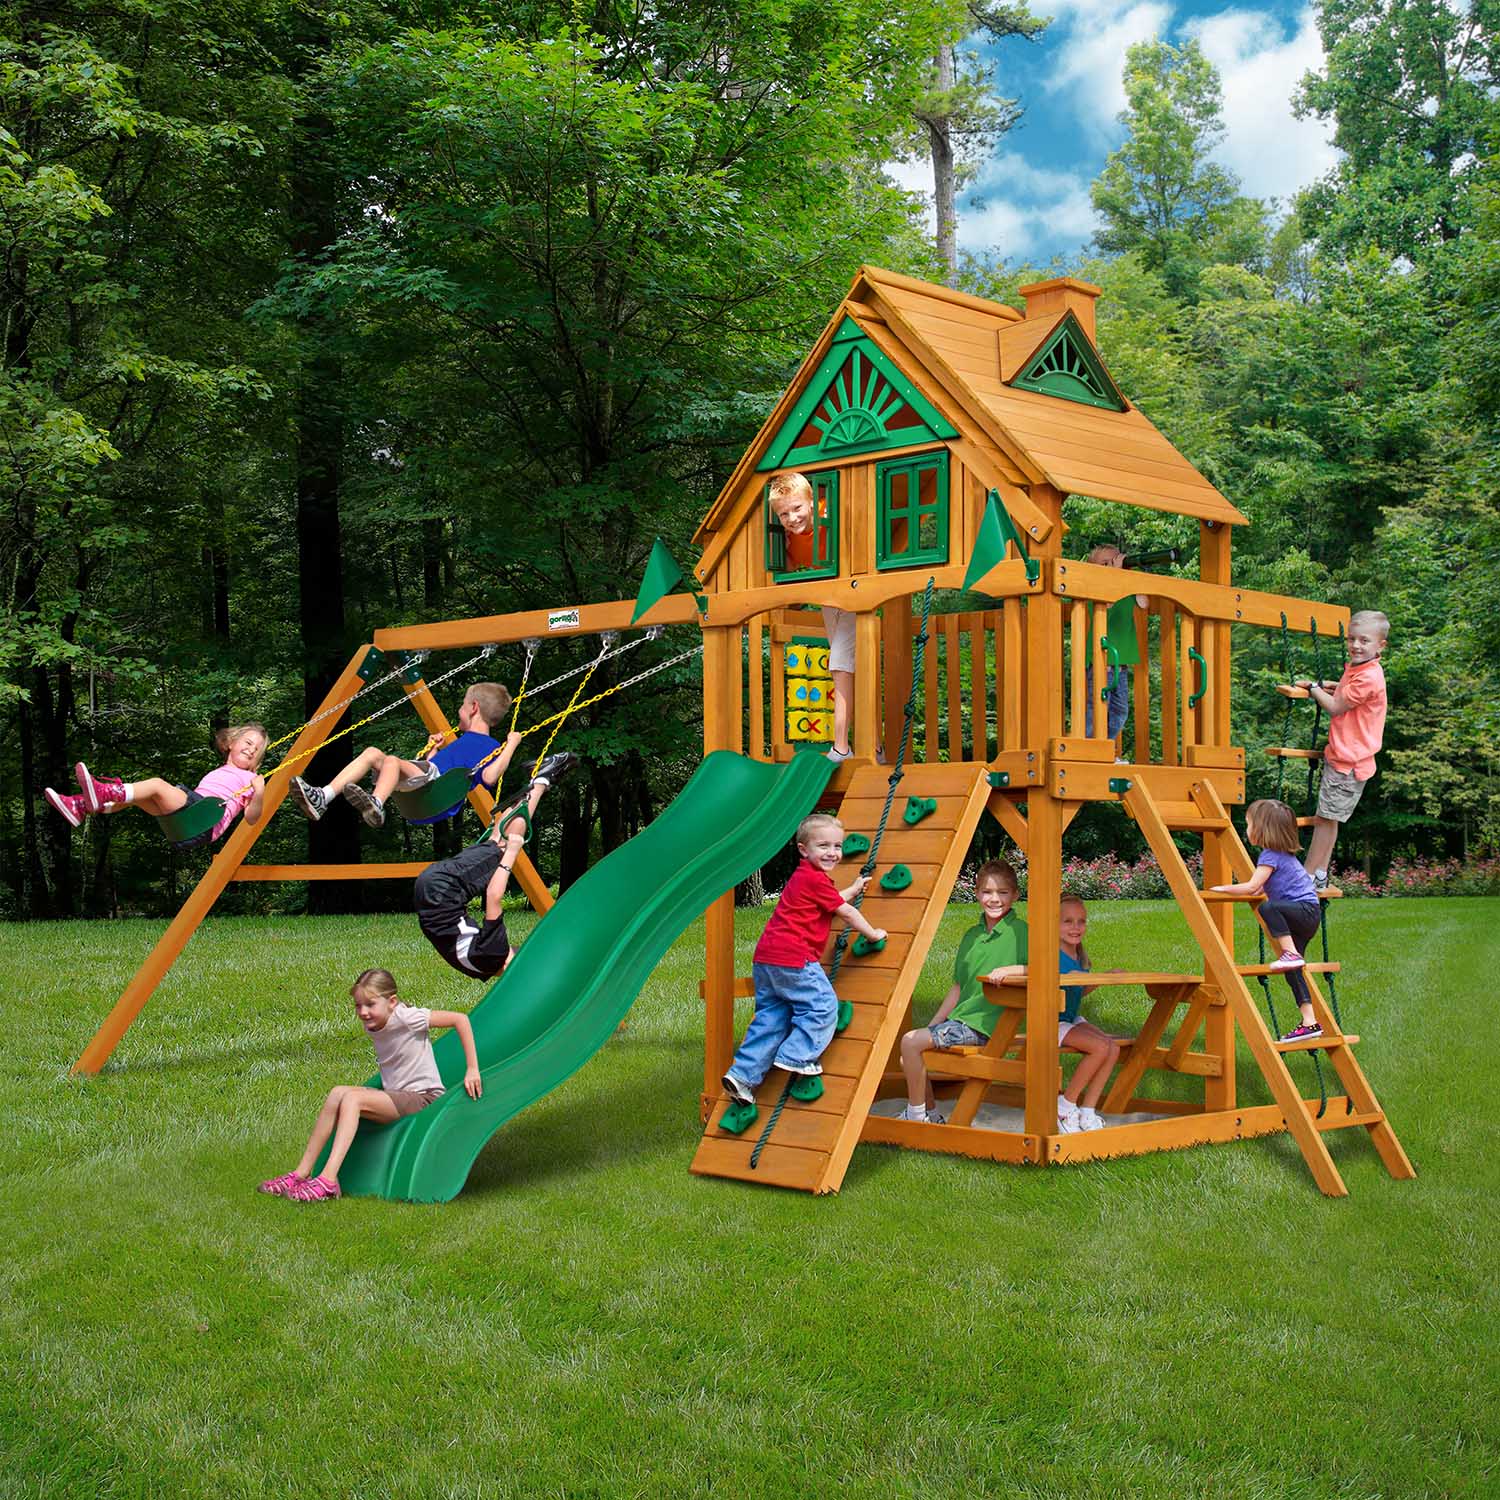 Gorilla-Playsets-Chateau-Treehouse-Wooden-Swingset